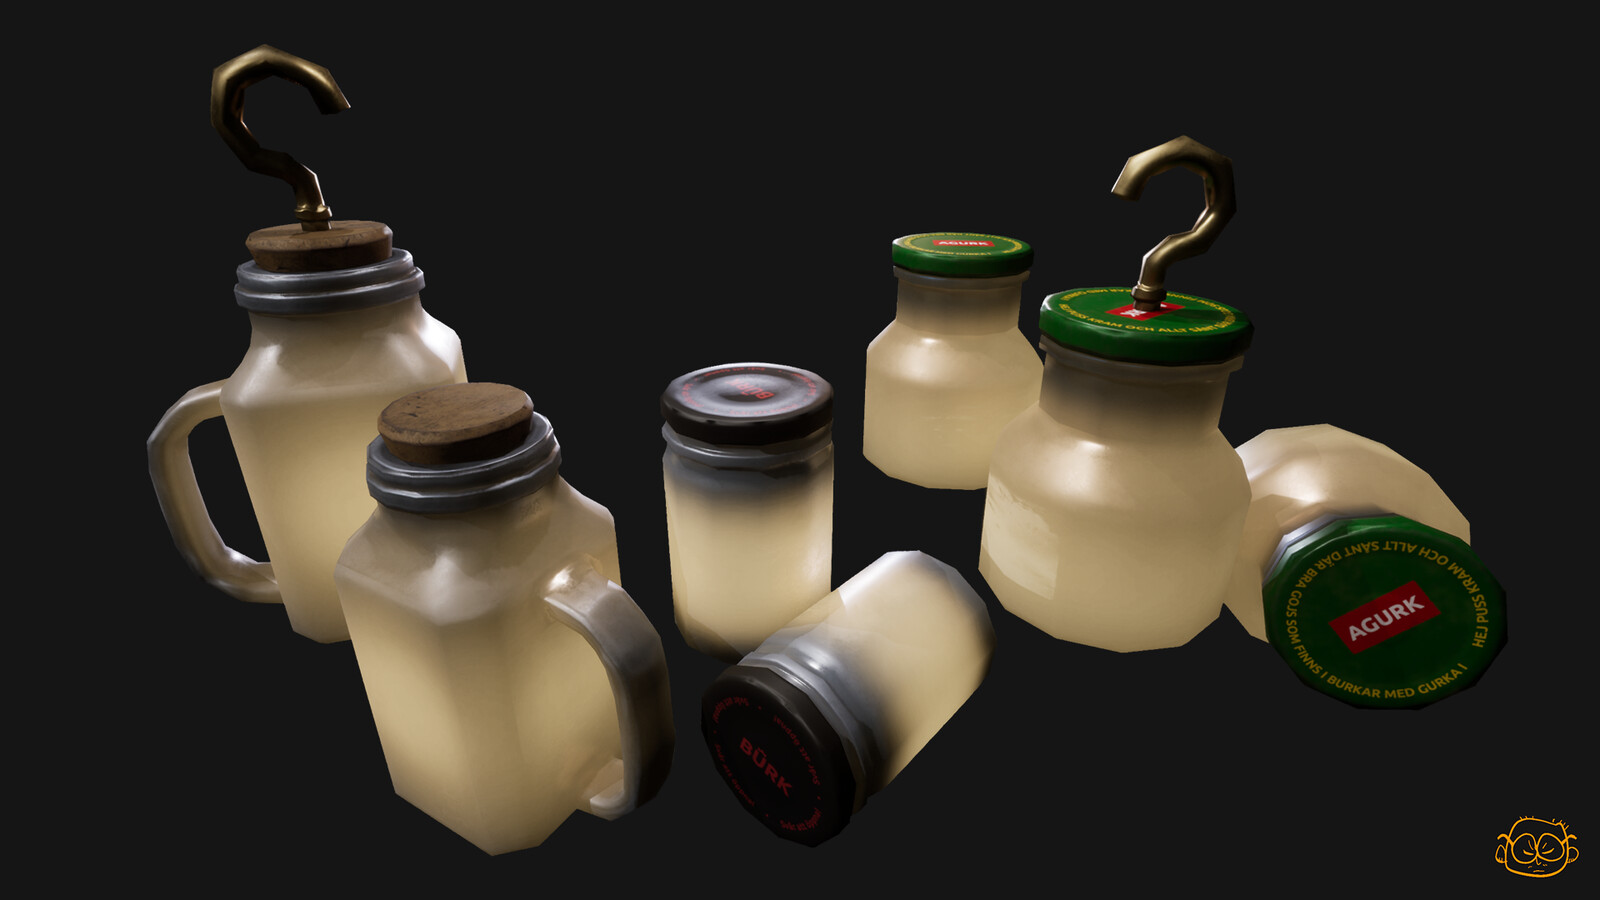 I was responsible for creating all light source assets for a cancelled project. The engine did not support translucent materials like glass, so everything had to be faked in the texture passes. 